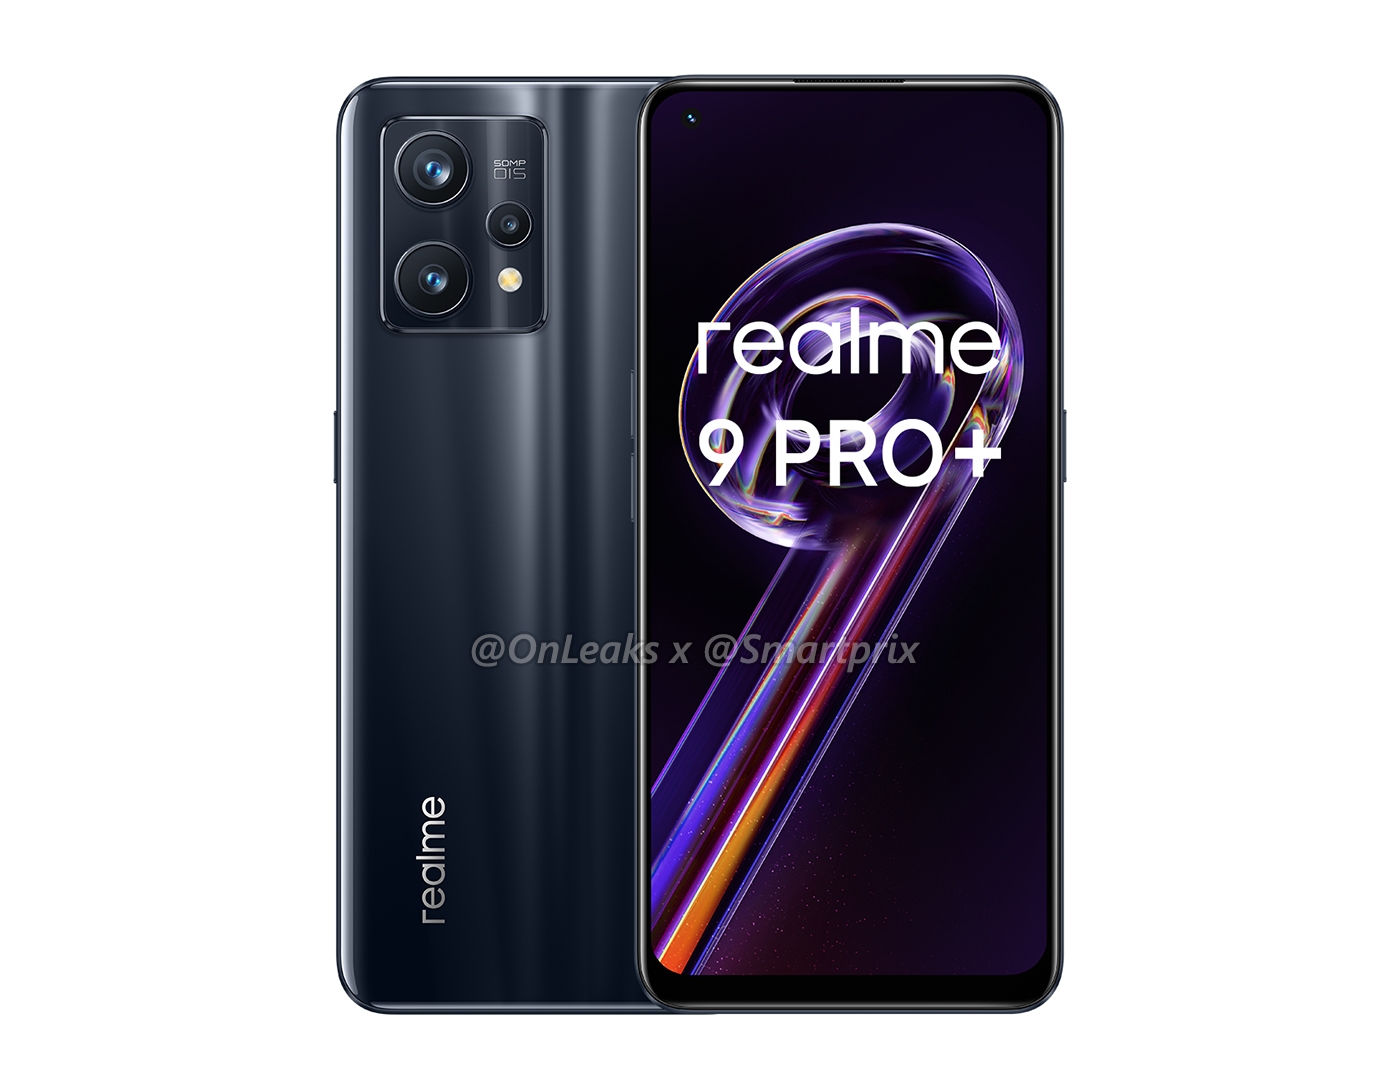 AMOLED screen, Dimensity 920 chip and 50 MP camera: OnLeaks showed renderings and revealed the specifications of realme 9 Pro +